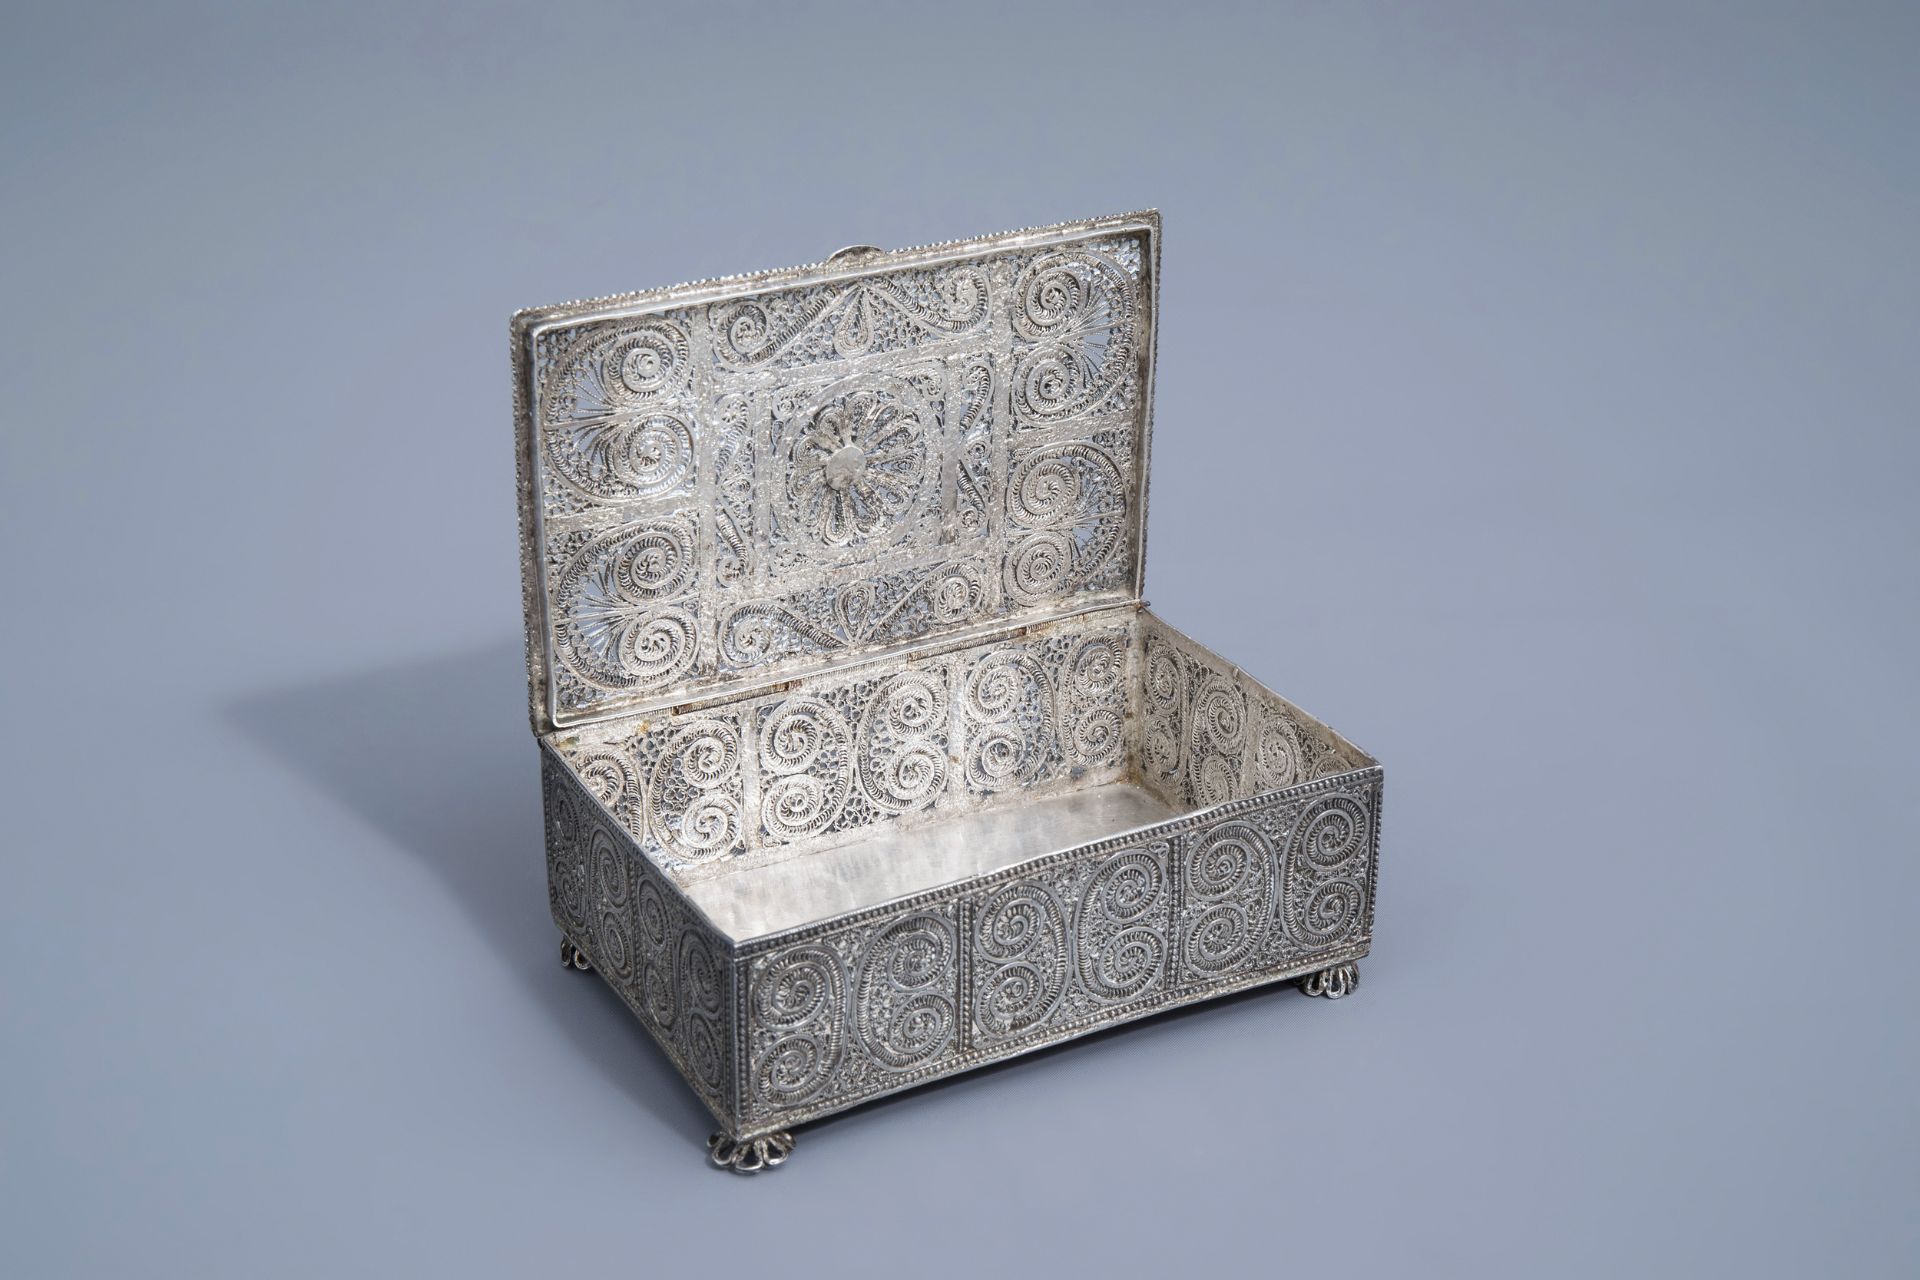 A silver filigree casket with floral design, 835/000, various marks, 19th/20th C. - Image 2 of 11